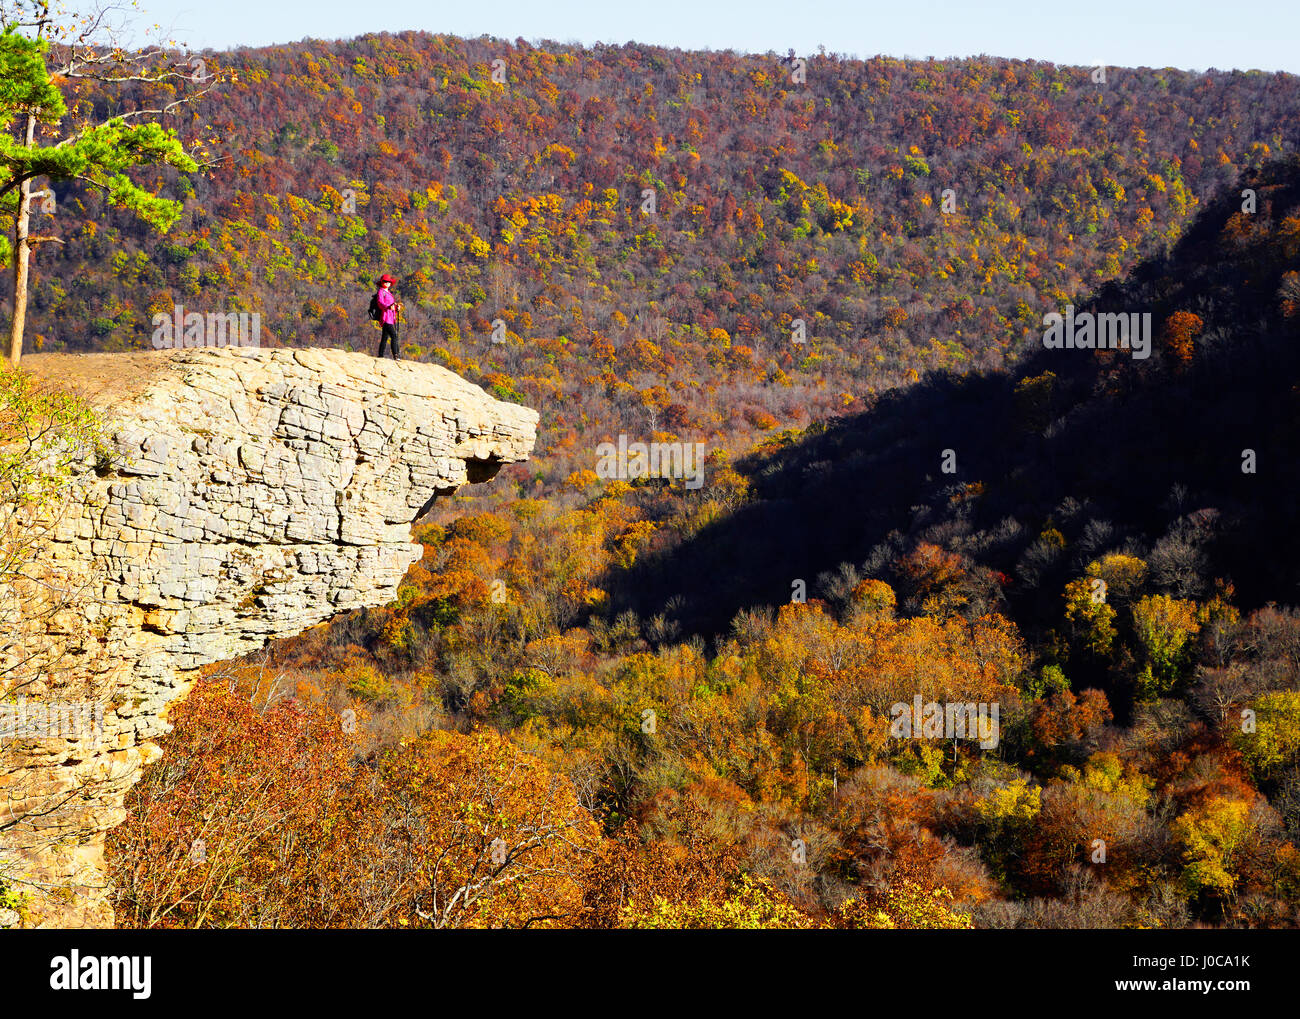 Hiker on Hawksbill Crag at Whittaker Point in the Upper Buffalo Wilderness Area of the Ozark Mountains. Stock Photo